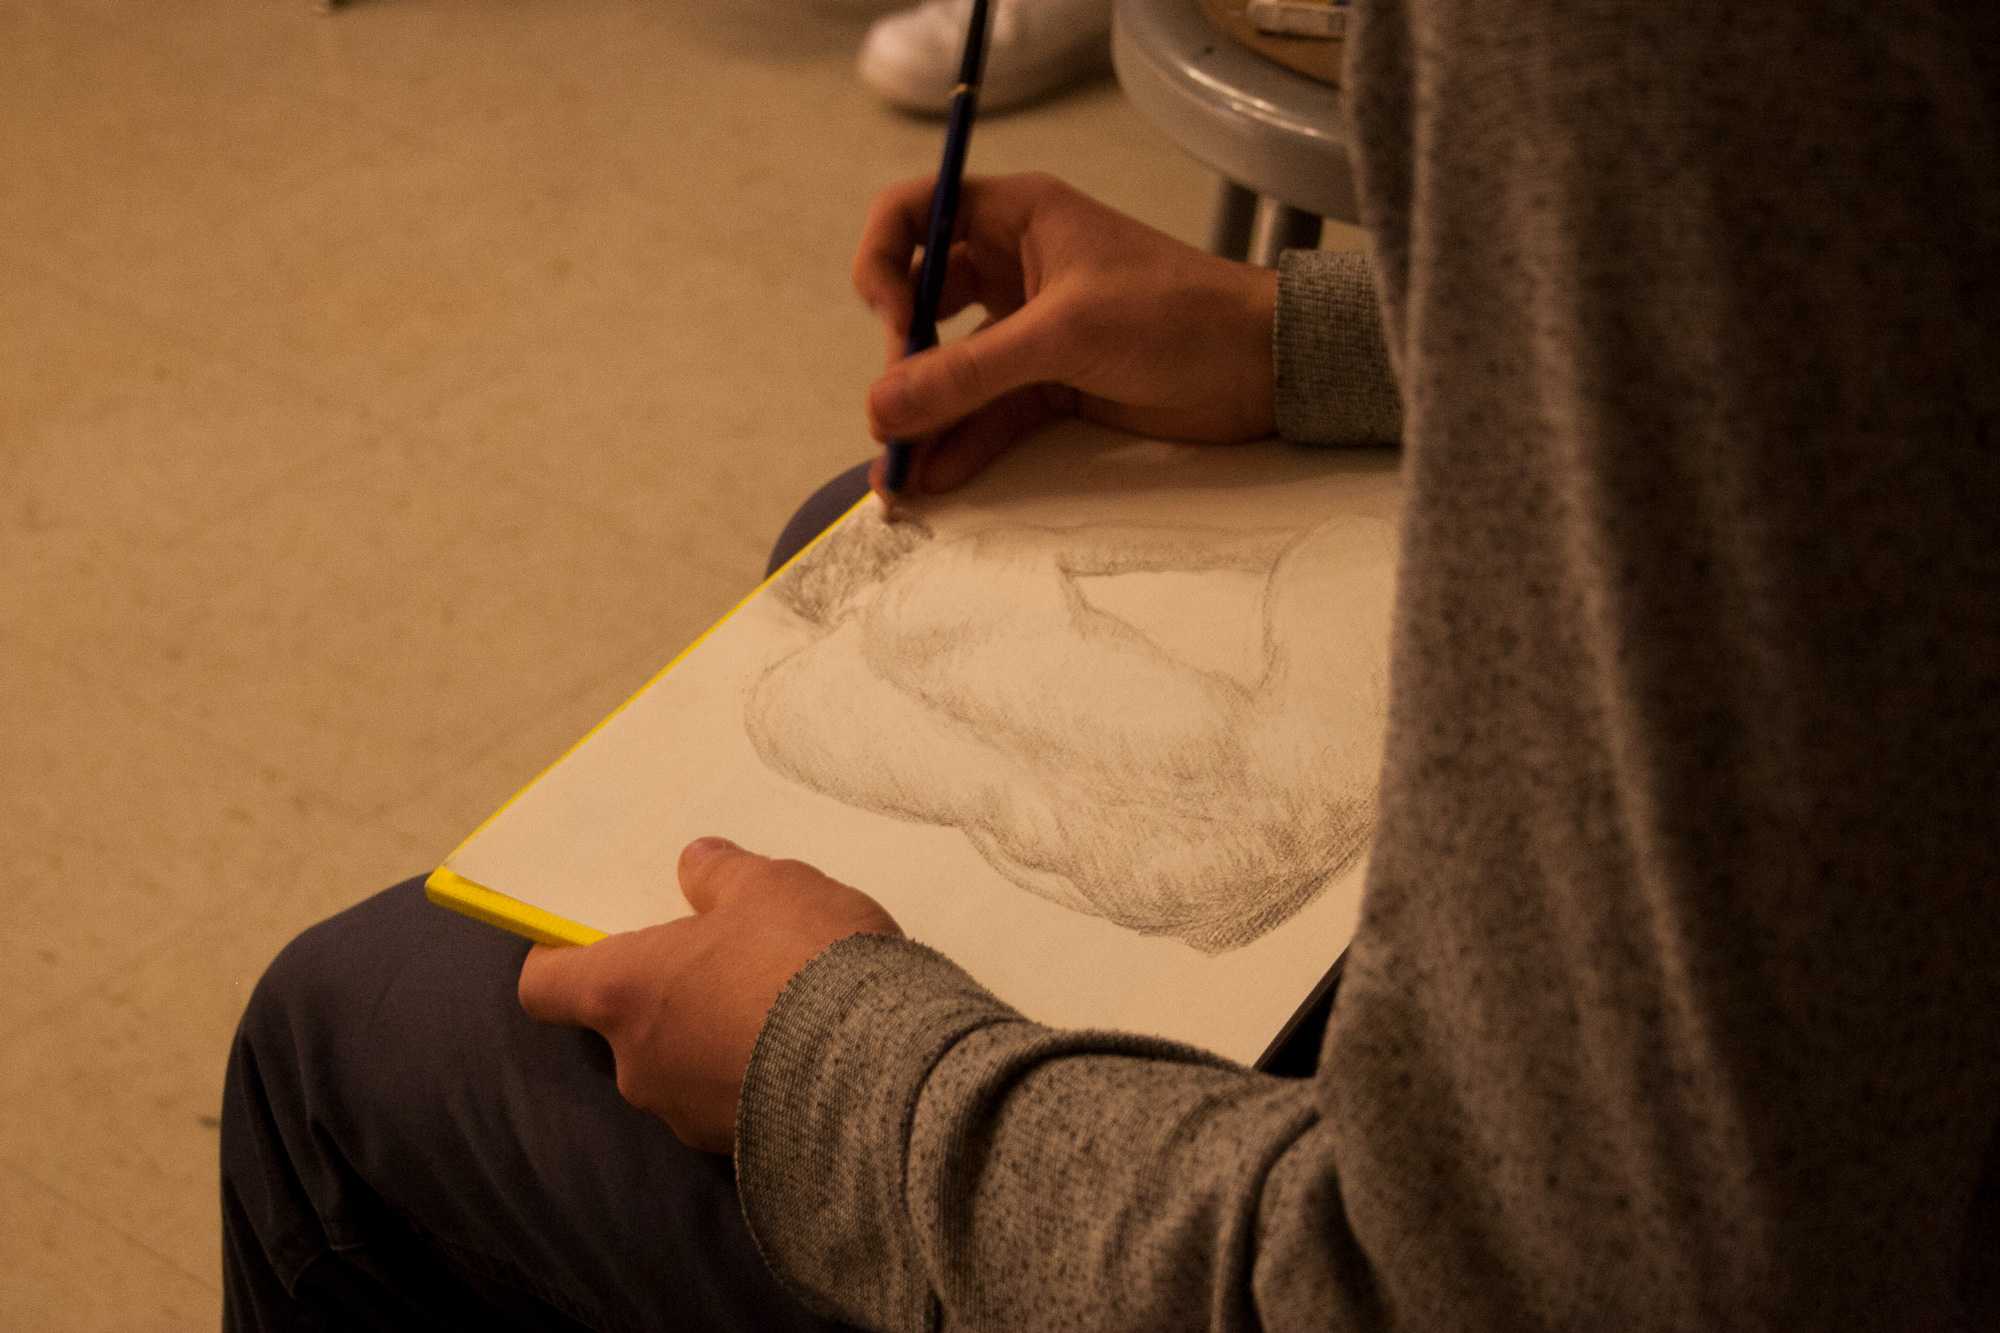 Sophomore, Seth Pray, draws a nude model. A figure drawing session was held in Wey Hall on Friday, November 11th. Students could sign up and come in and draw a live nude model to practice their skills.